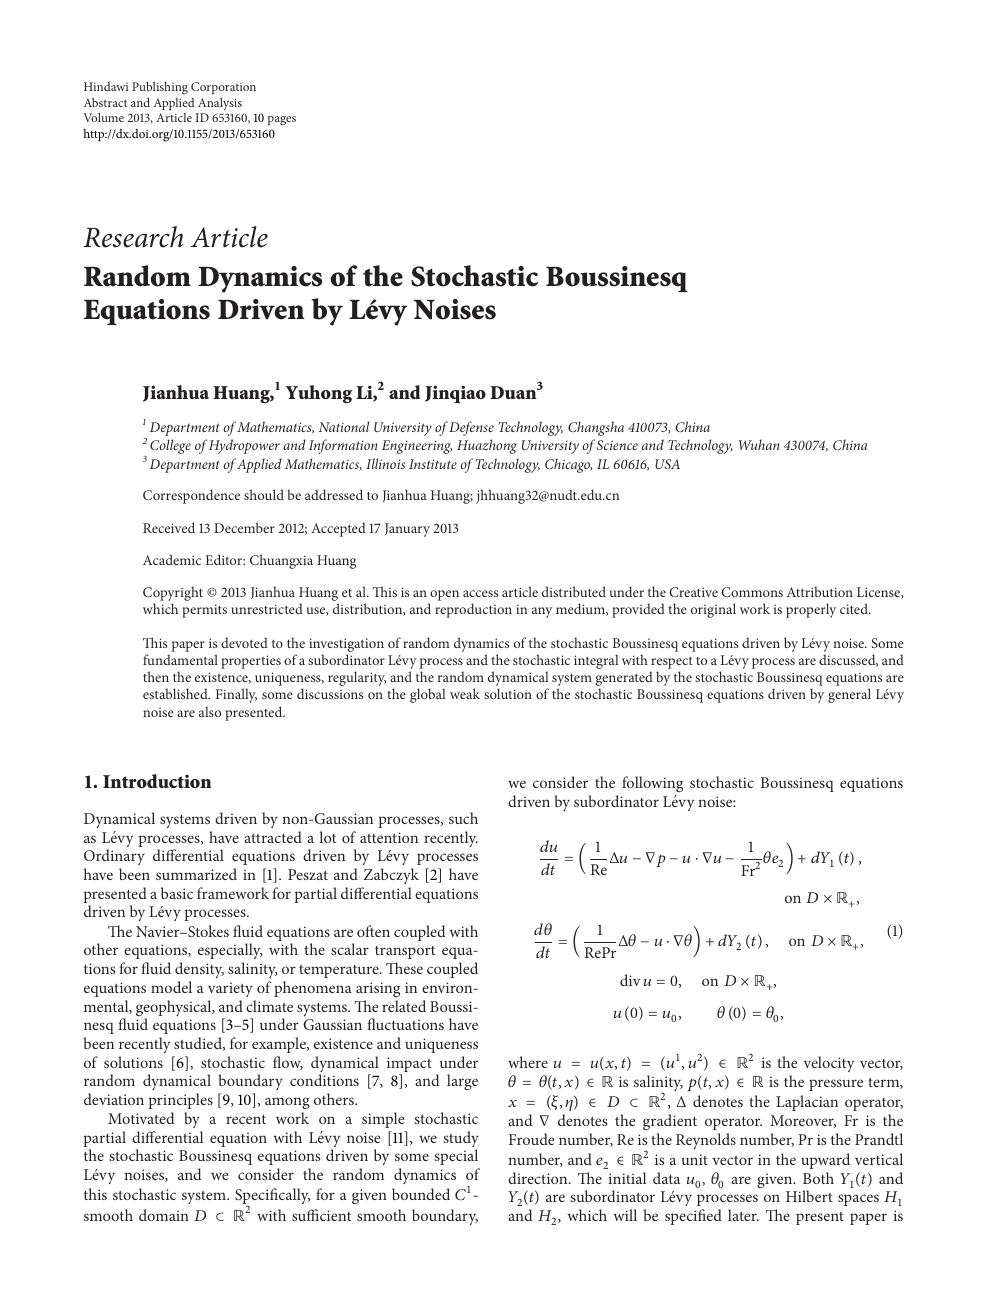 Random Dynamics Of The Stochastic Boussinesq Equations Driven By Levy Noises Topic Of Research Paper In Mathematics Download Scholarly Article Pdf And Read For Free On Cyberleninka Open Science Hub